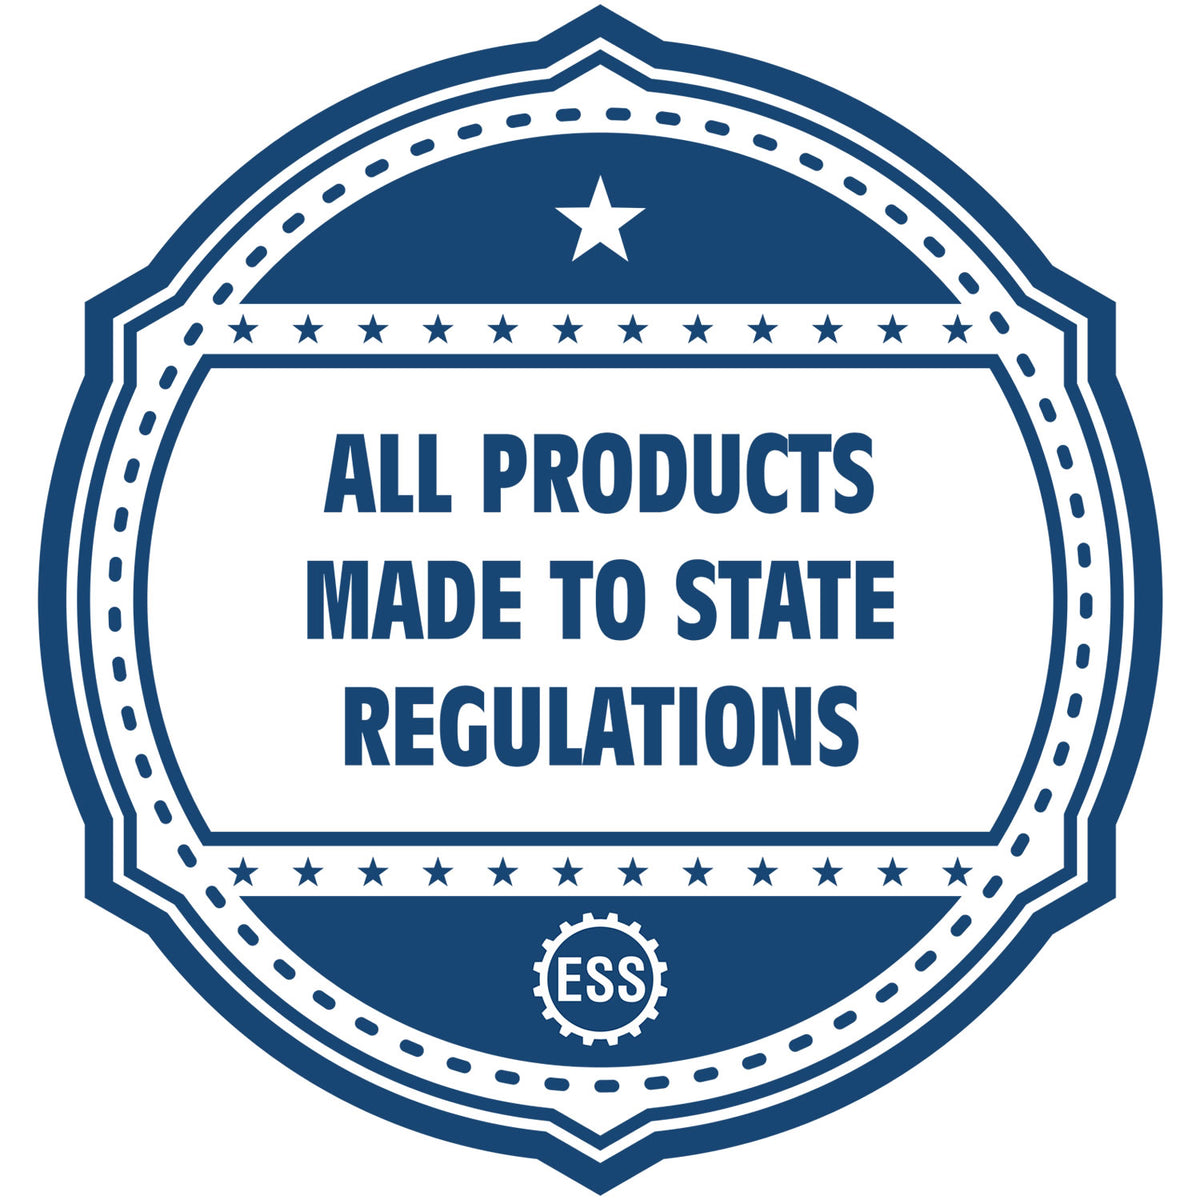 A blue icon or badge for the Hybrid Arkansas Engineer Seal showing that this product is made in compliance with state regulations.